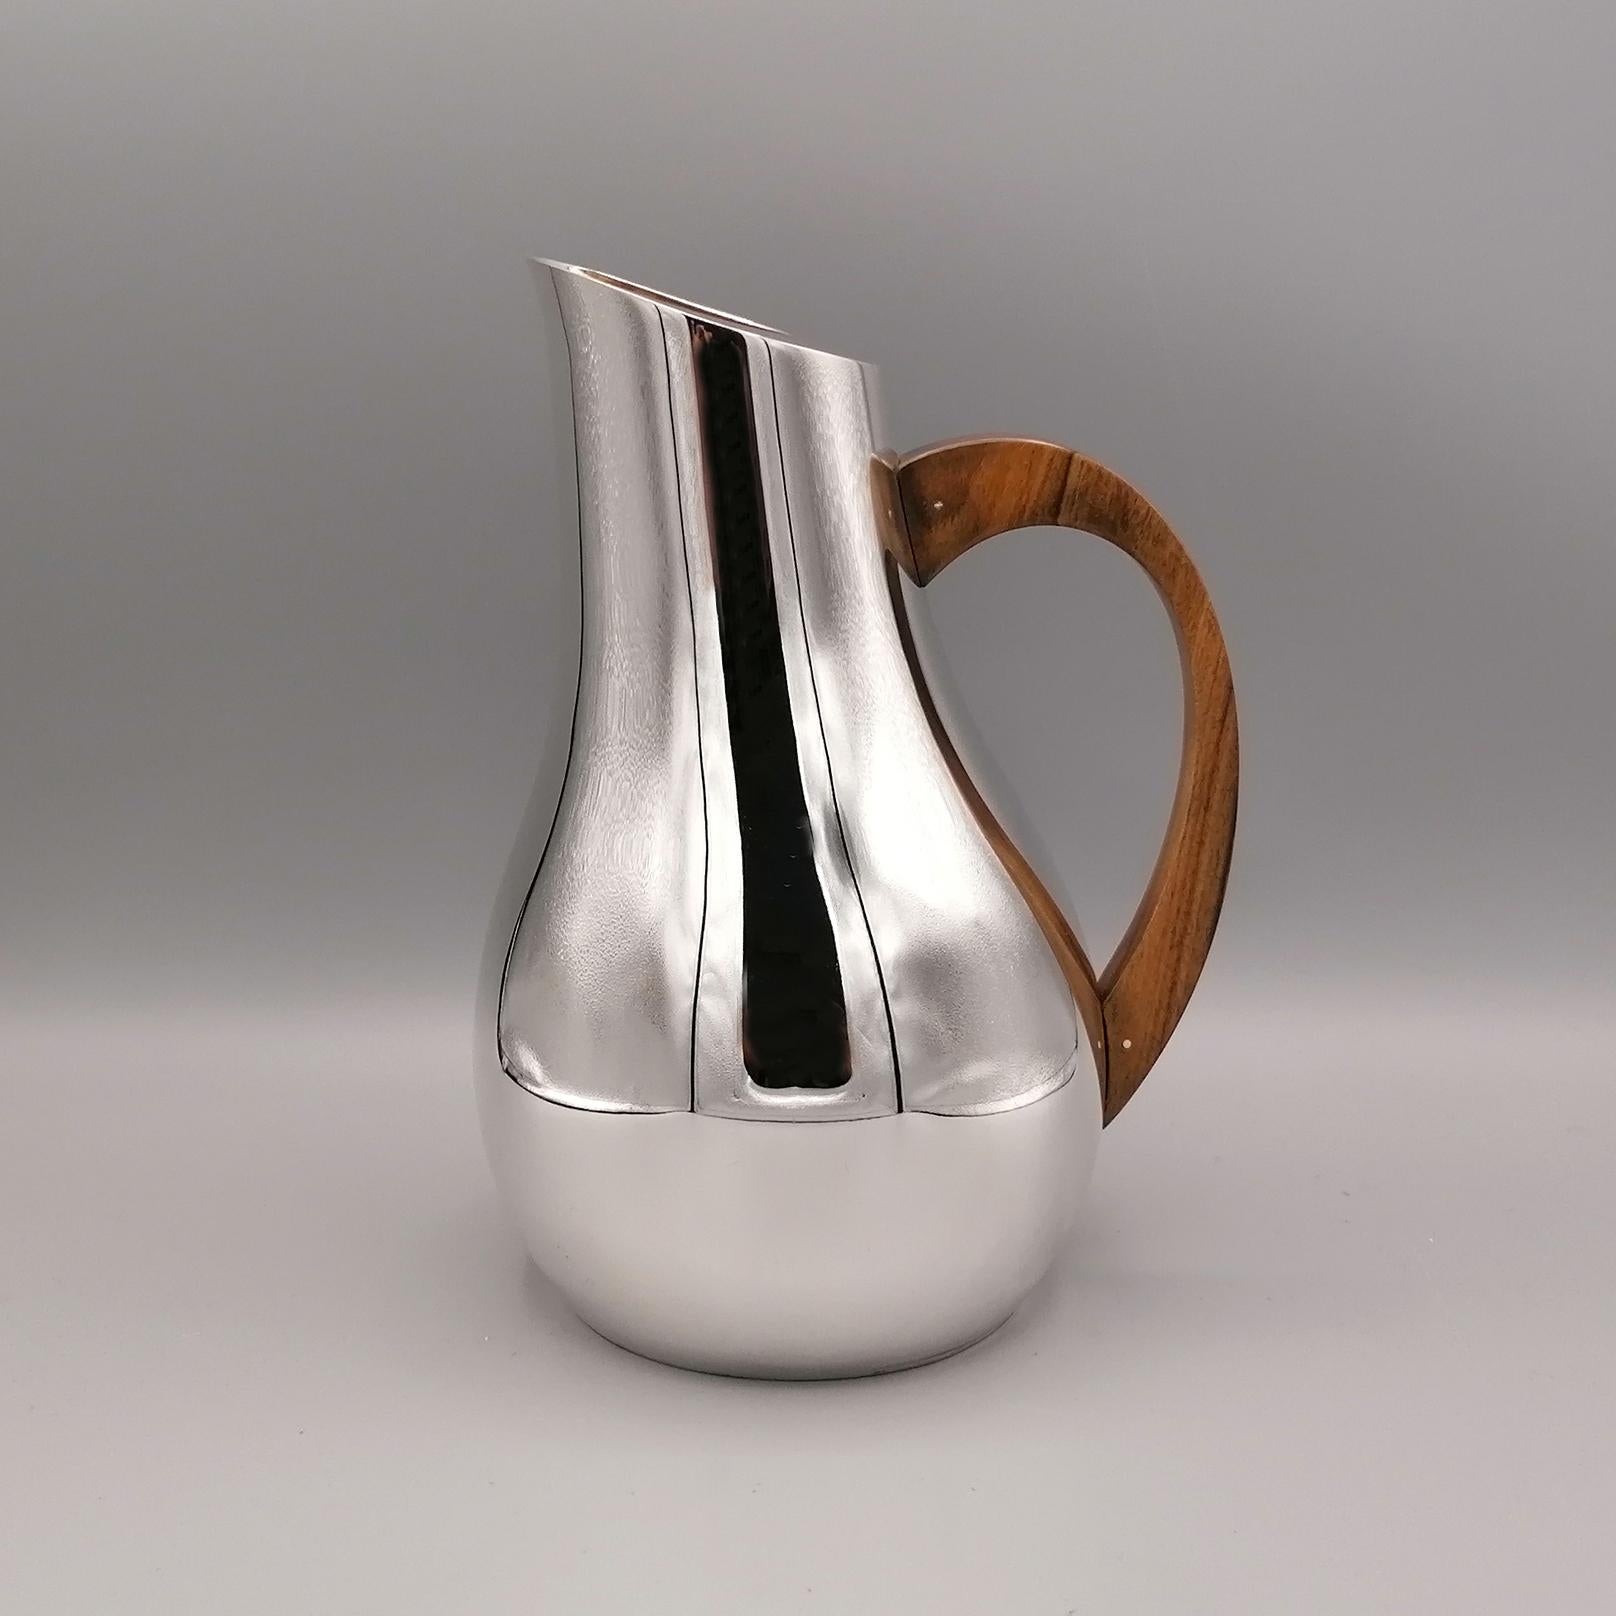 Solid sterling silver water carafe. 
The body is round and has been completely handmade starting from a flat silver sheet and subsequently modeled to give the object a round and slender shape, in the shape of a pear.
The carafe handle was also